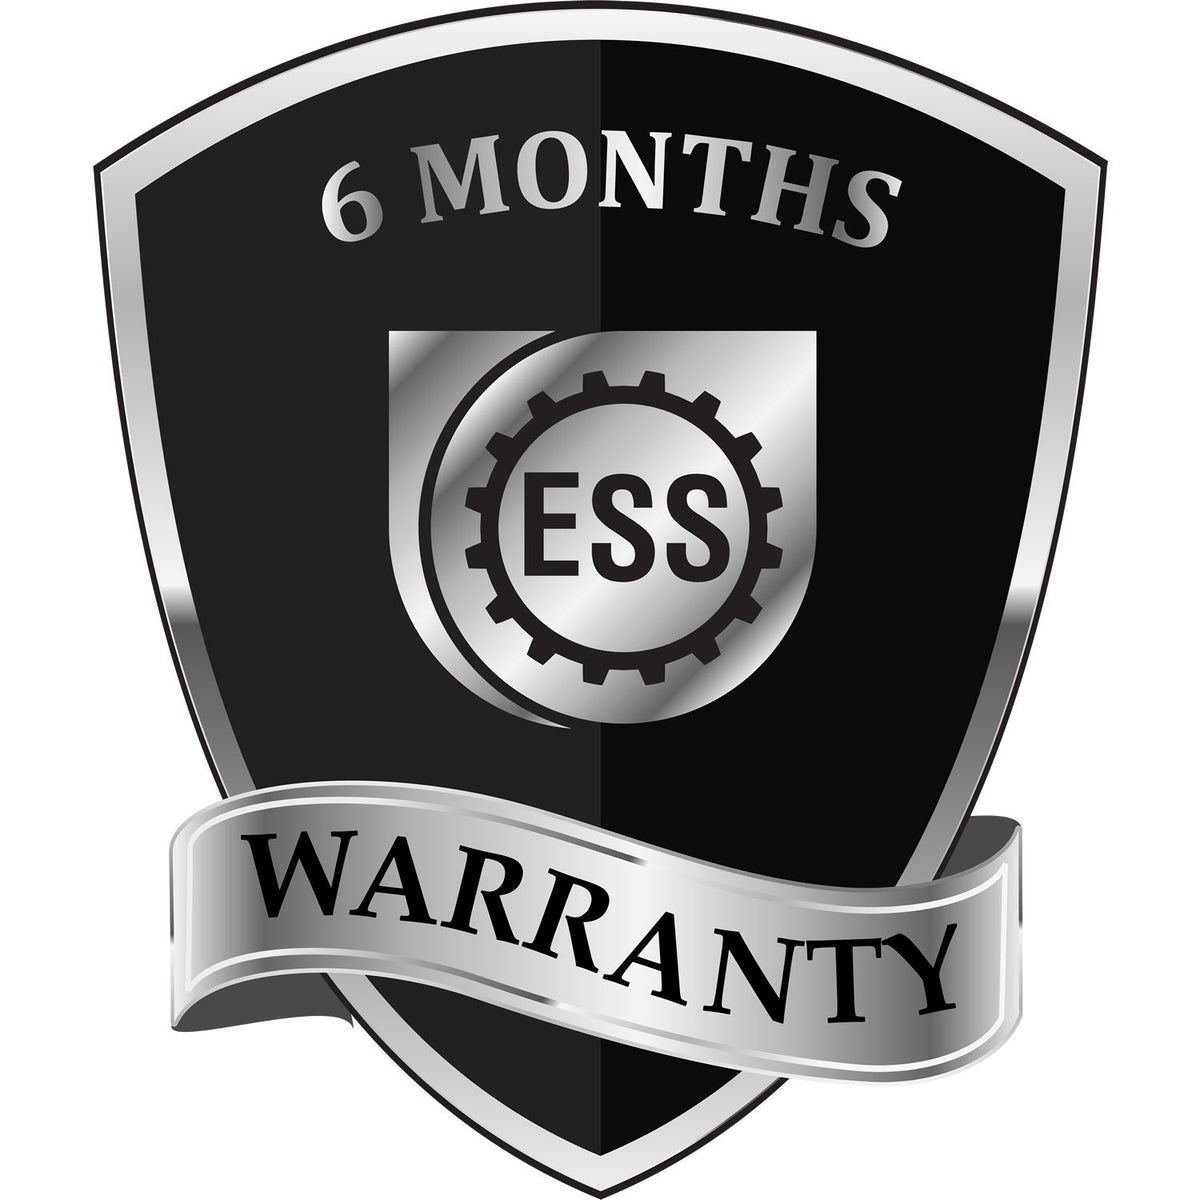 A badge or emblem showing a warranty icon for the New York Professional Engineer Seal Stamp